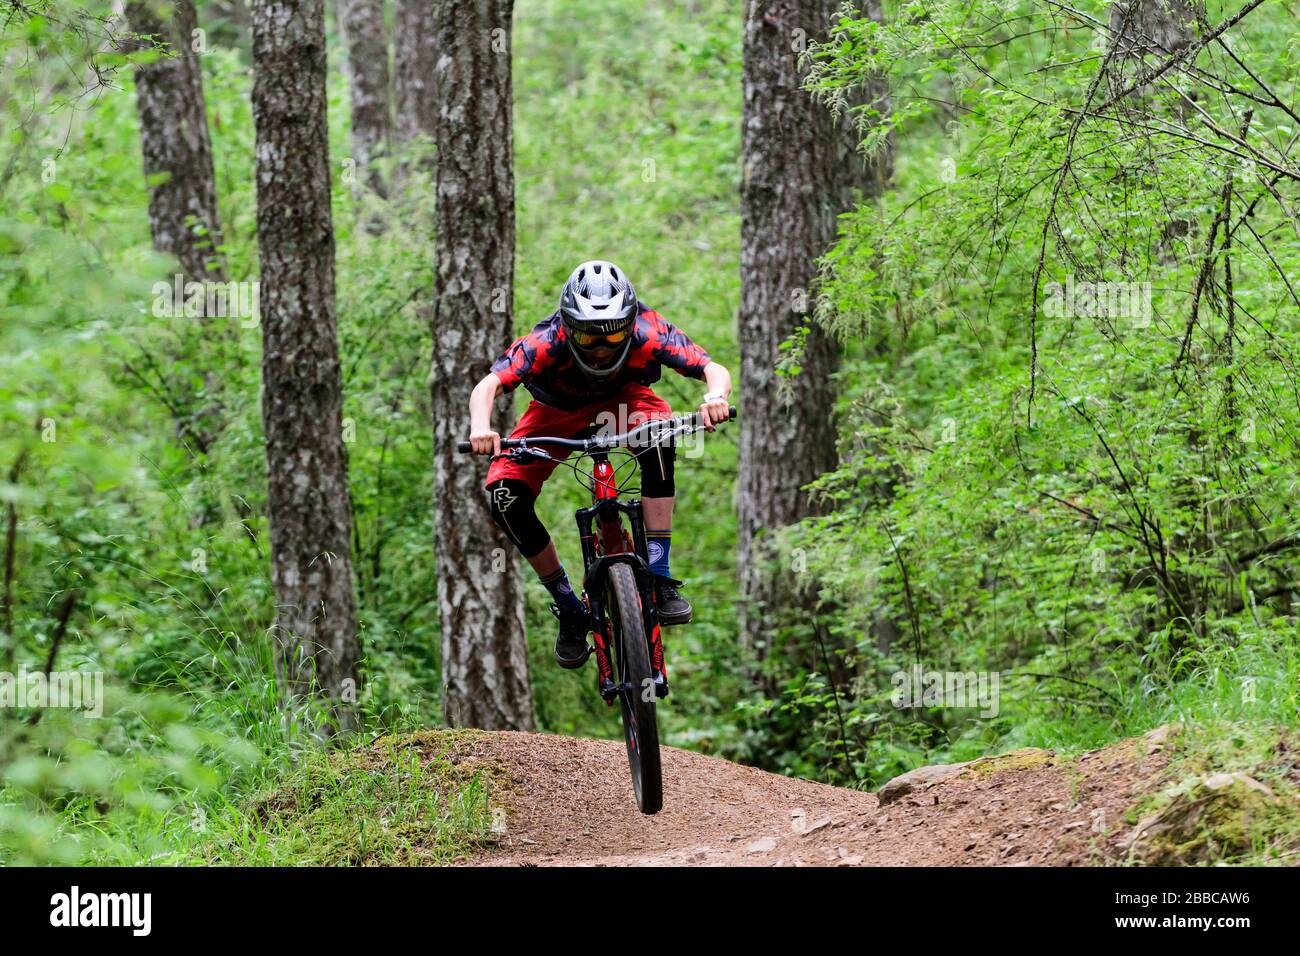 Mountain bikers on the Double D course during the 2019 Mt. Tzouhalem Enduro Event on Mt. Tzouhalem in Duncan, British Columbia. Stock Photo